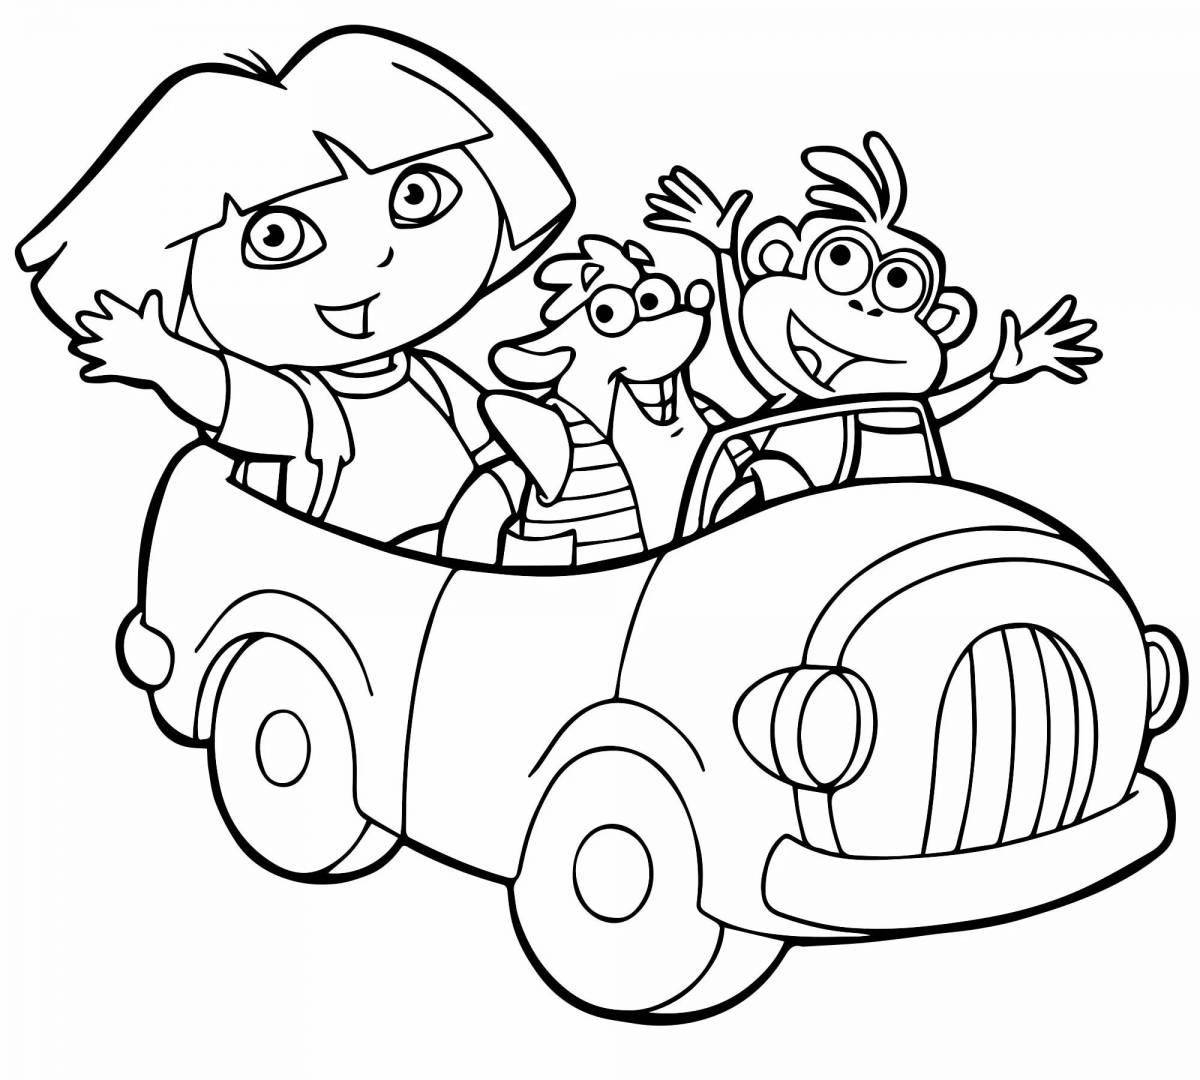 Color-gleeful coloring book for cartoon children 5-6 years old